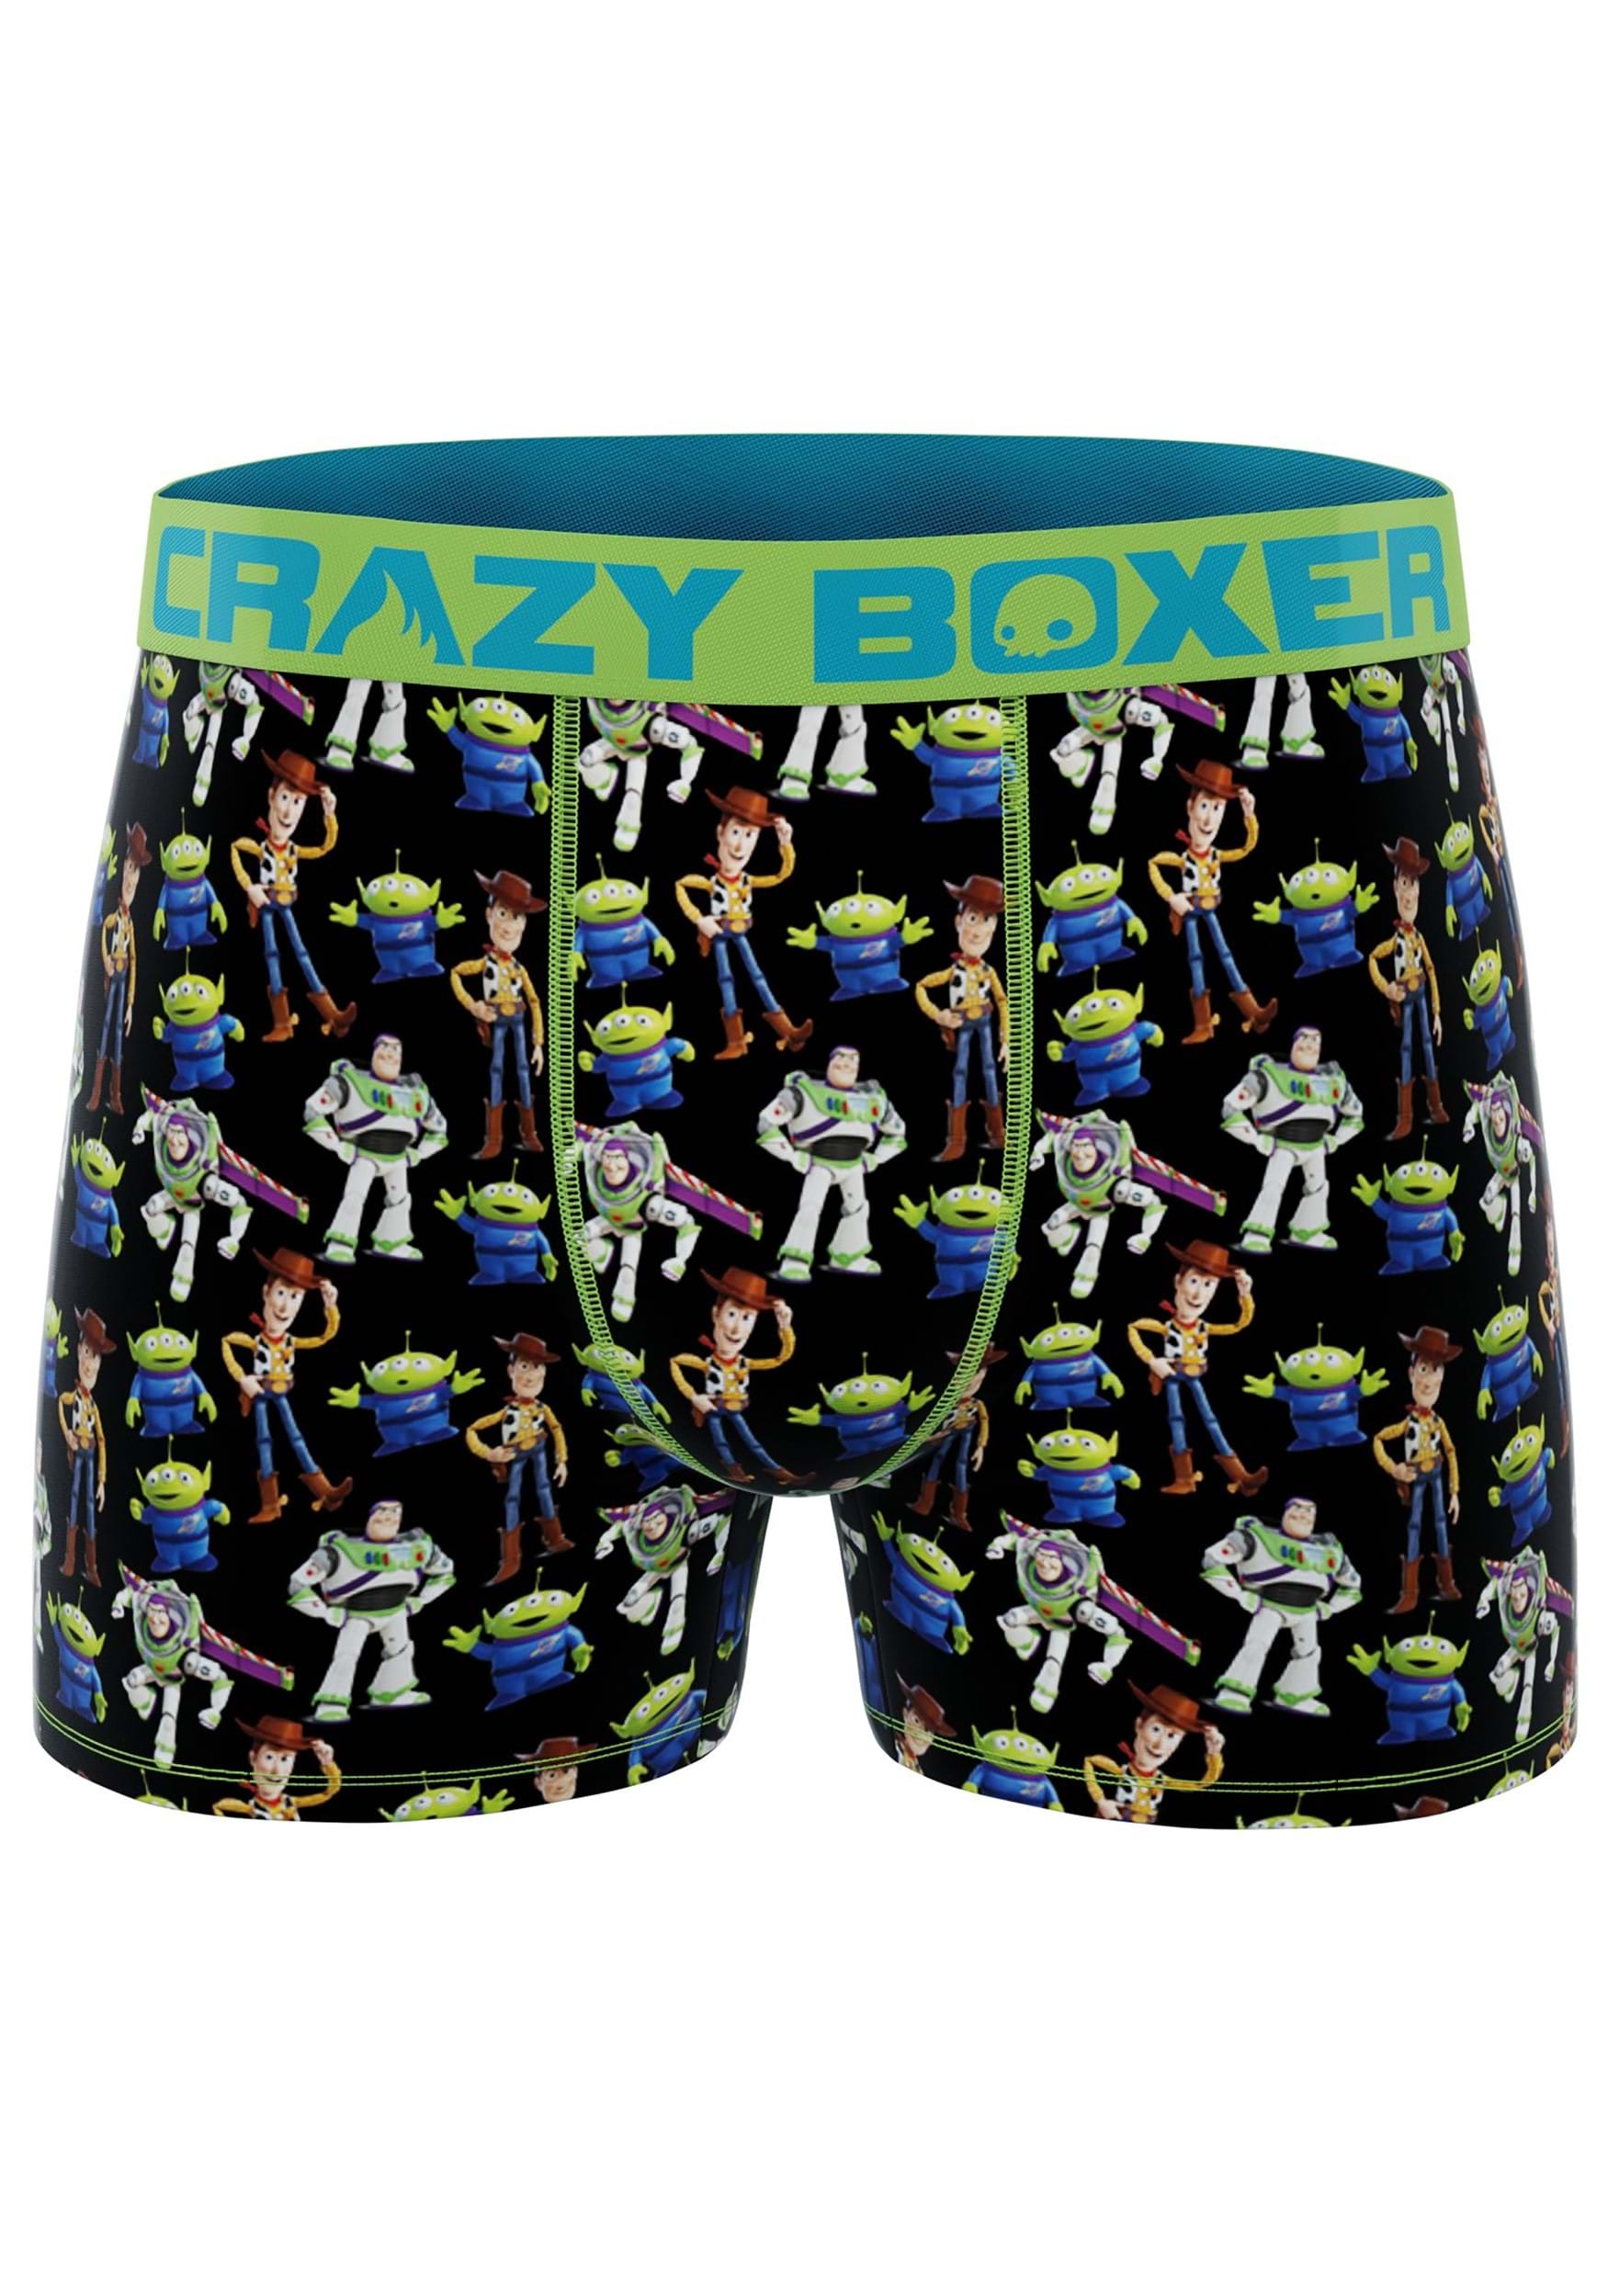 https://images.fun.com/products/76366/1-1/crazy-boxers-mens-boxer-briefs-disney-toy-story.jpg